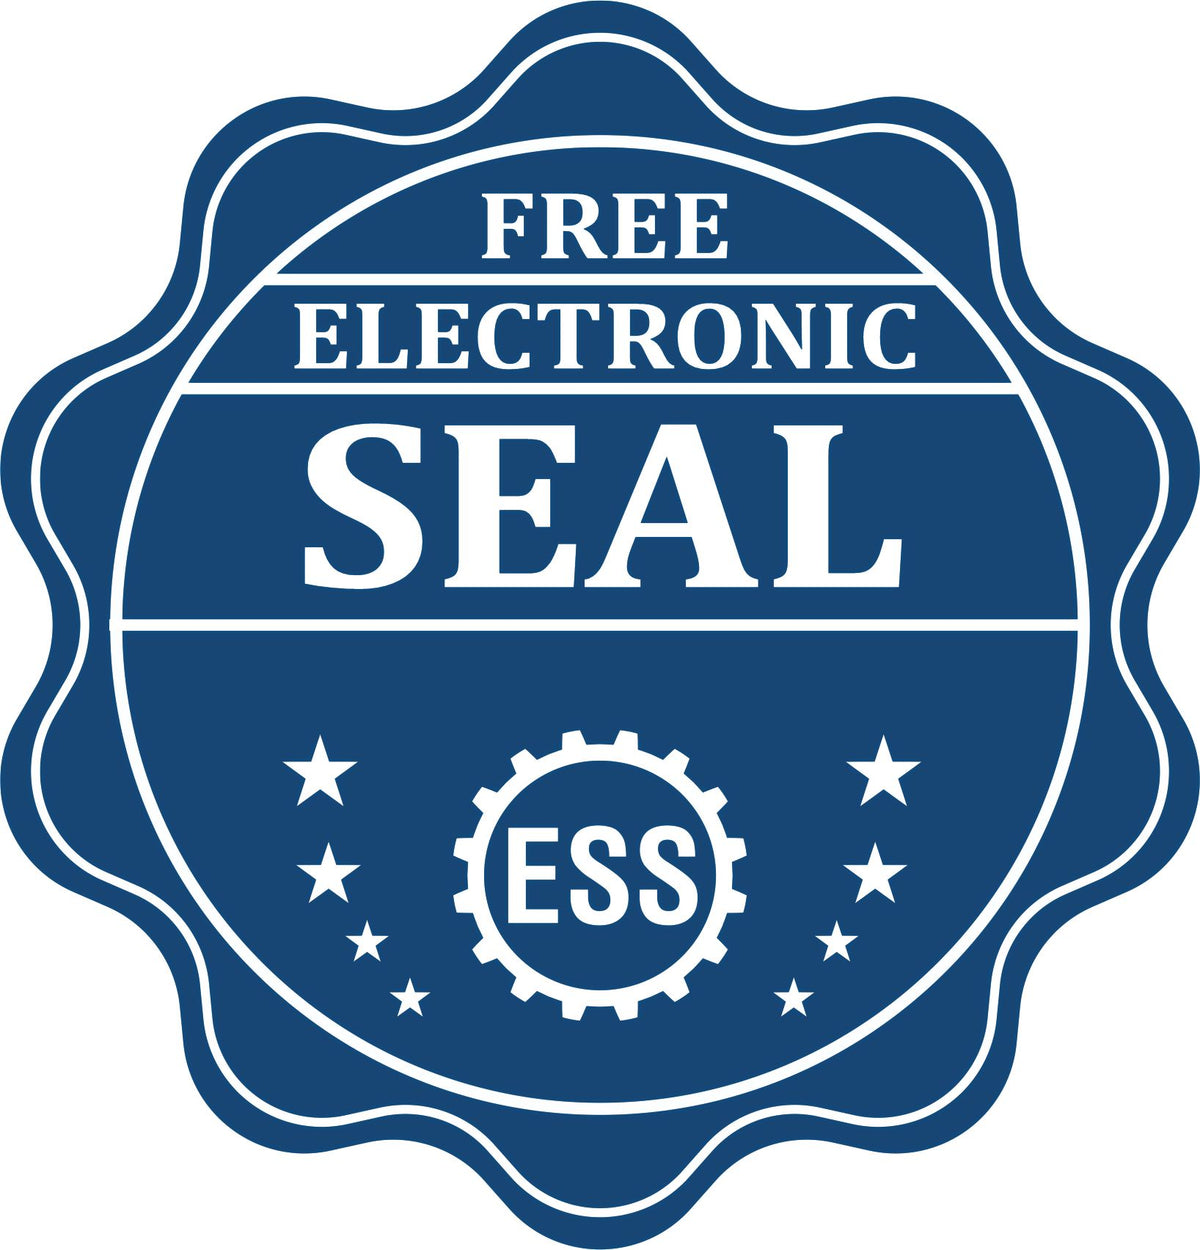 A badge showing a free electronic seal for the State of Oklahoma Extended Long Reach Geologist Seal with stars and the ESS gear on the emblem.